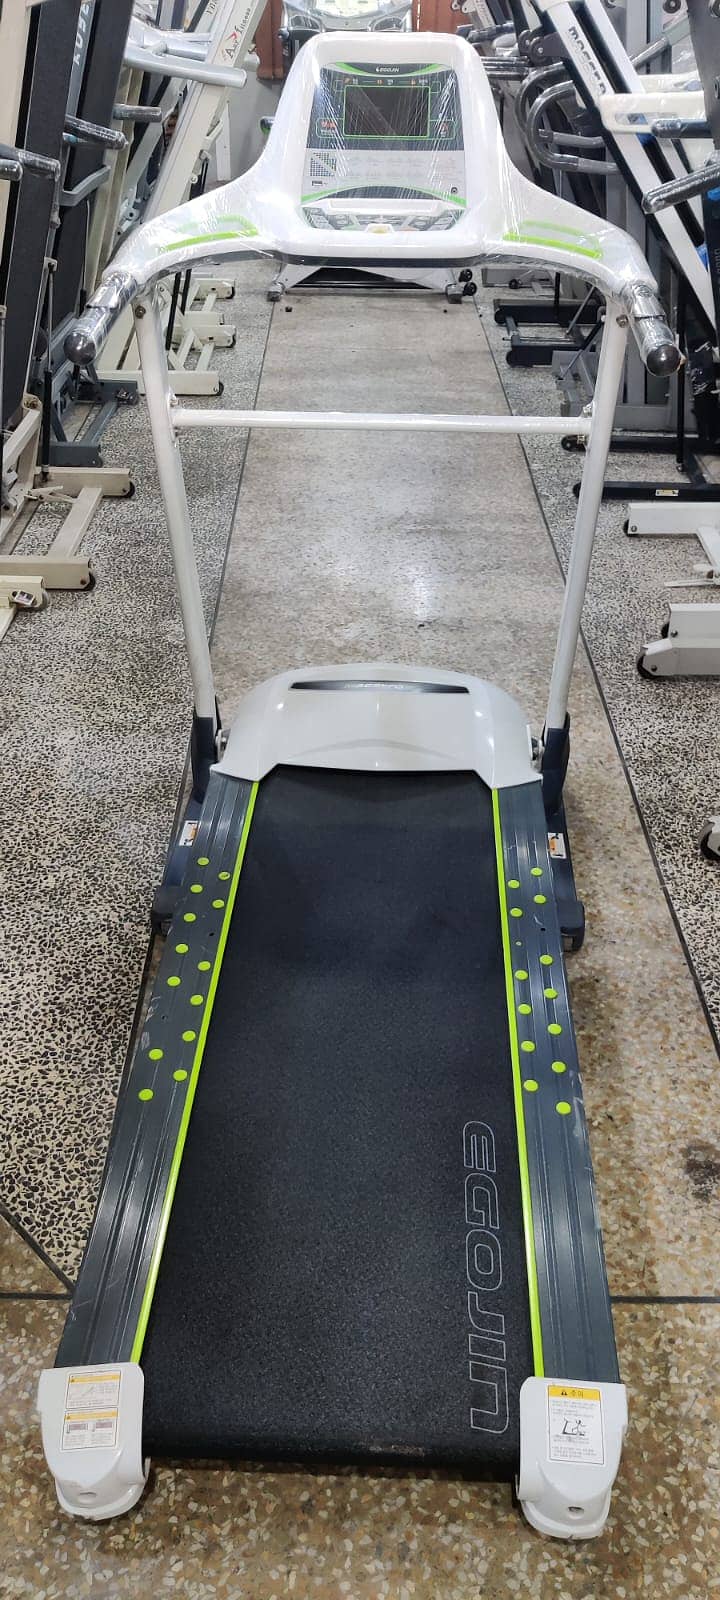 Treadmill Cycle Elliptical Running Machine Cardio Home & Commercial KW 1